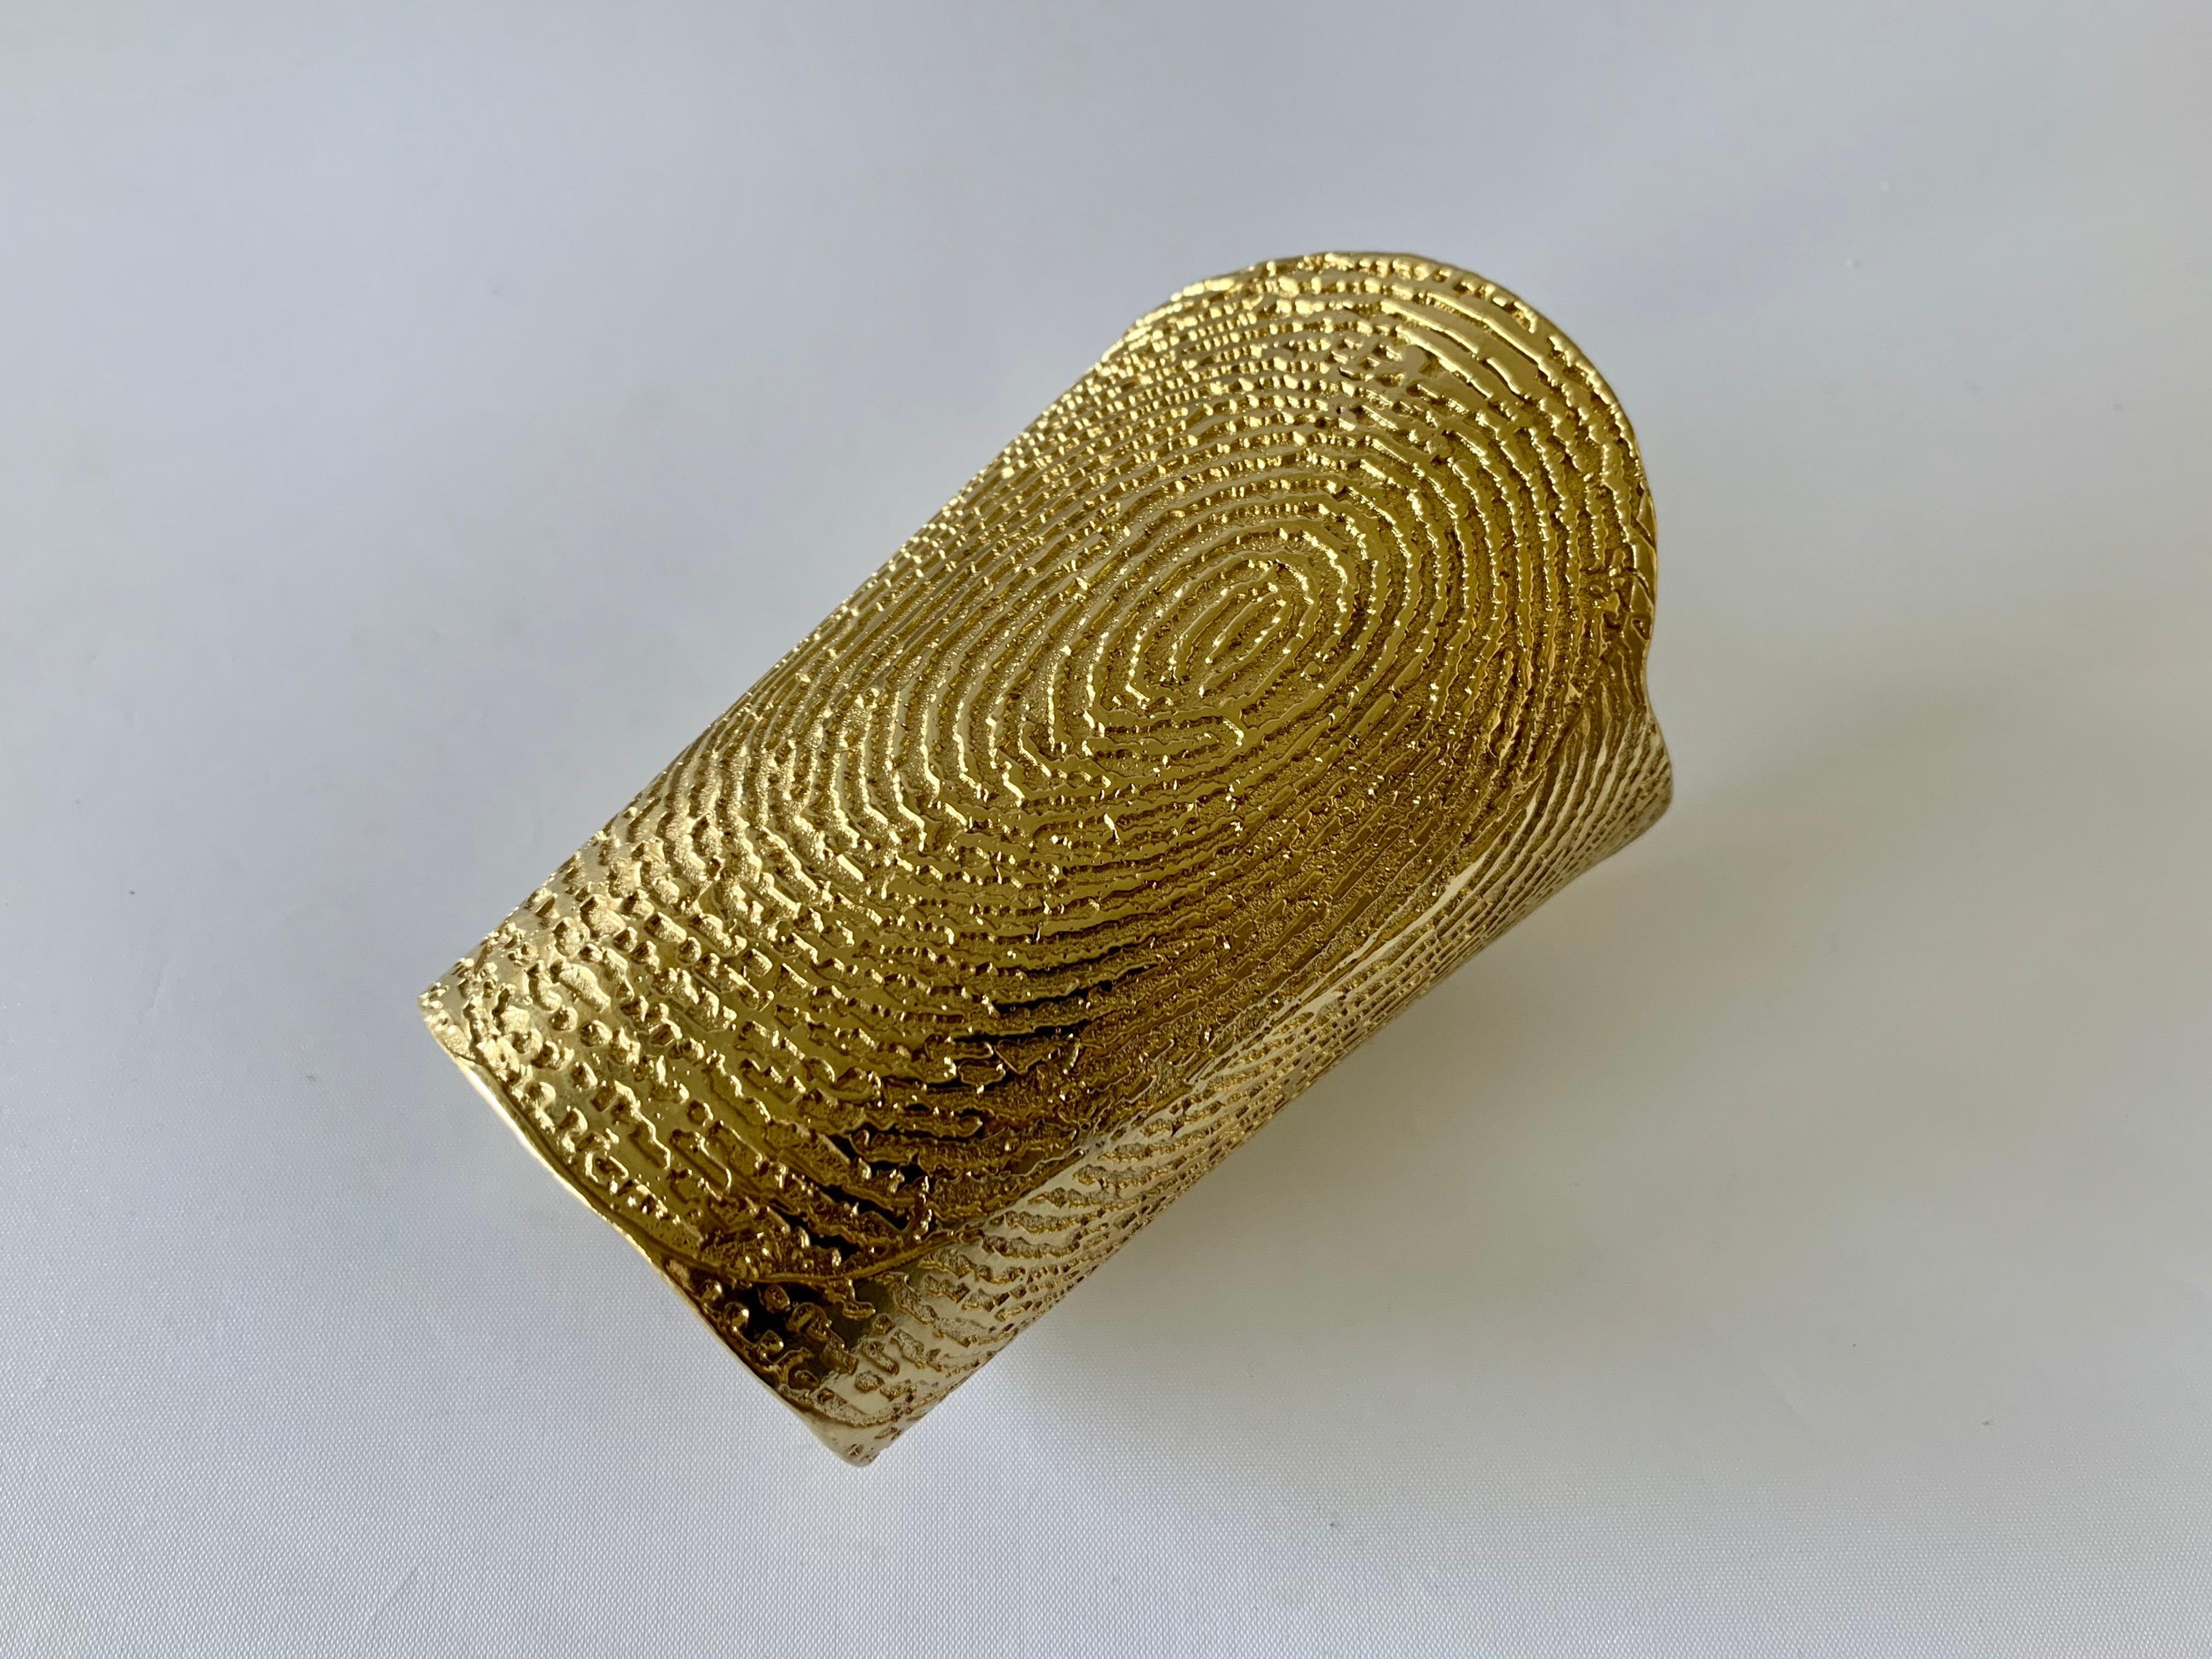 Massive contemporary Yves Saint Laurent runway gilt metal thumbprint pattern cuff bracelet - designed by Stefano Pilati for YSL in summer/springs 2011. The last image is from the runway show and showcases the bracelet as the accessory.